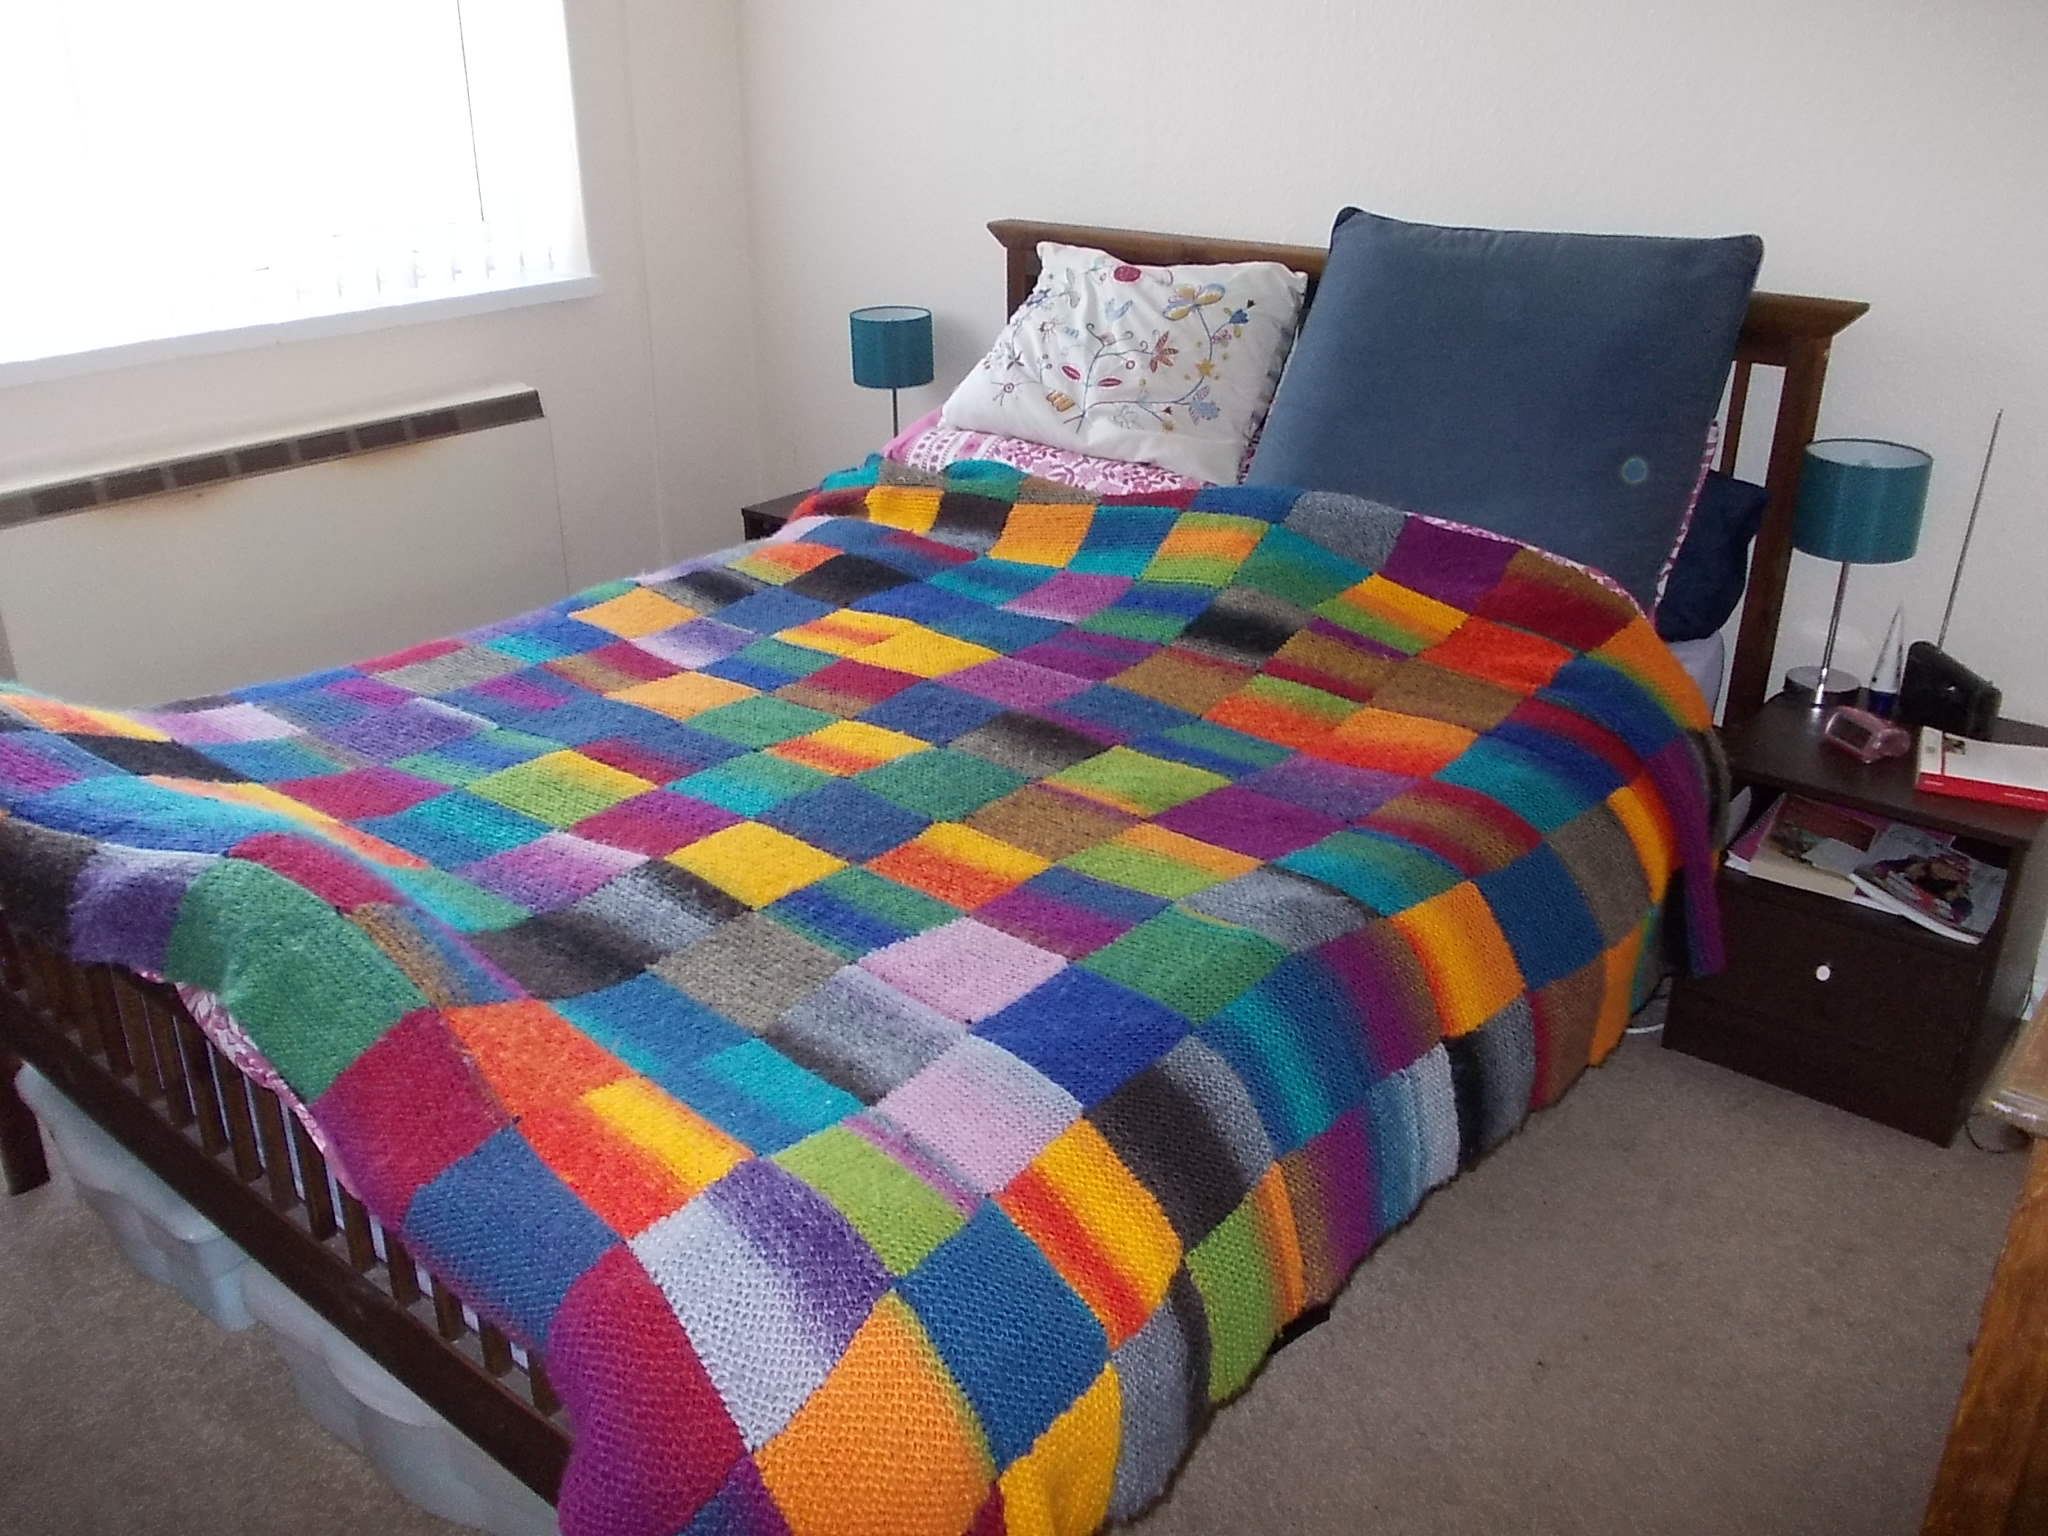 Patchwork Knitting Patterns For Blankets The Knitted Patchwork Blanket Saga Millykinsknits